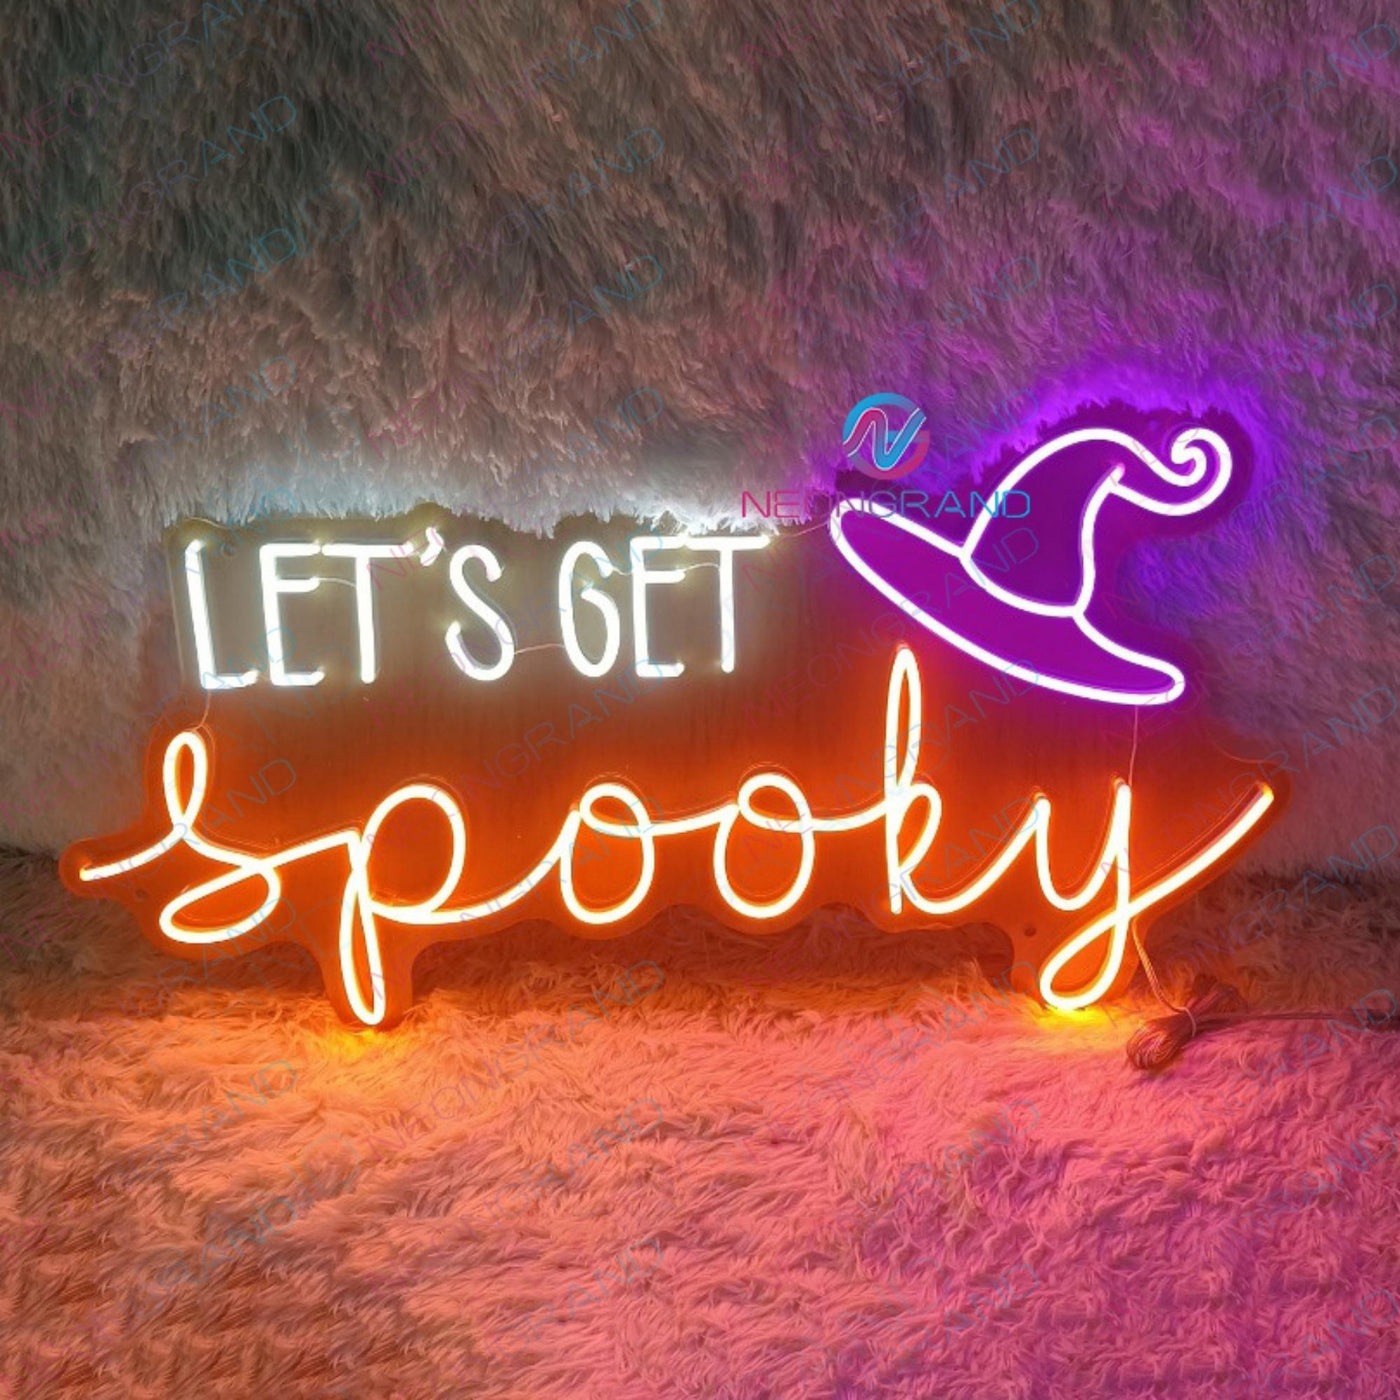 Let's Get Spooky Neon Sign For Halloween Night